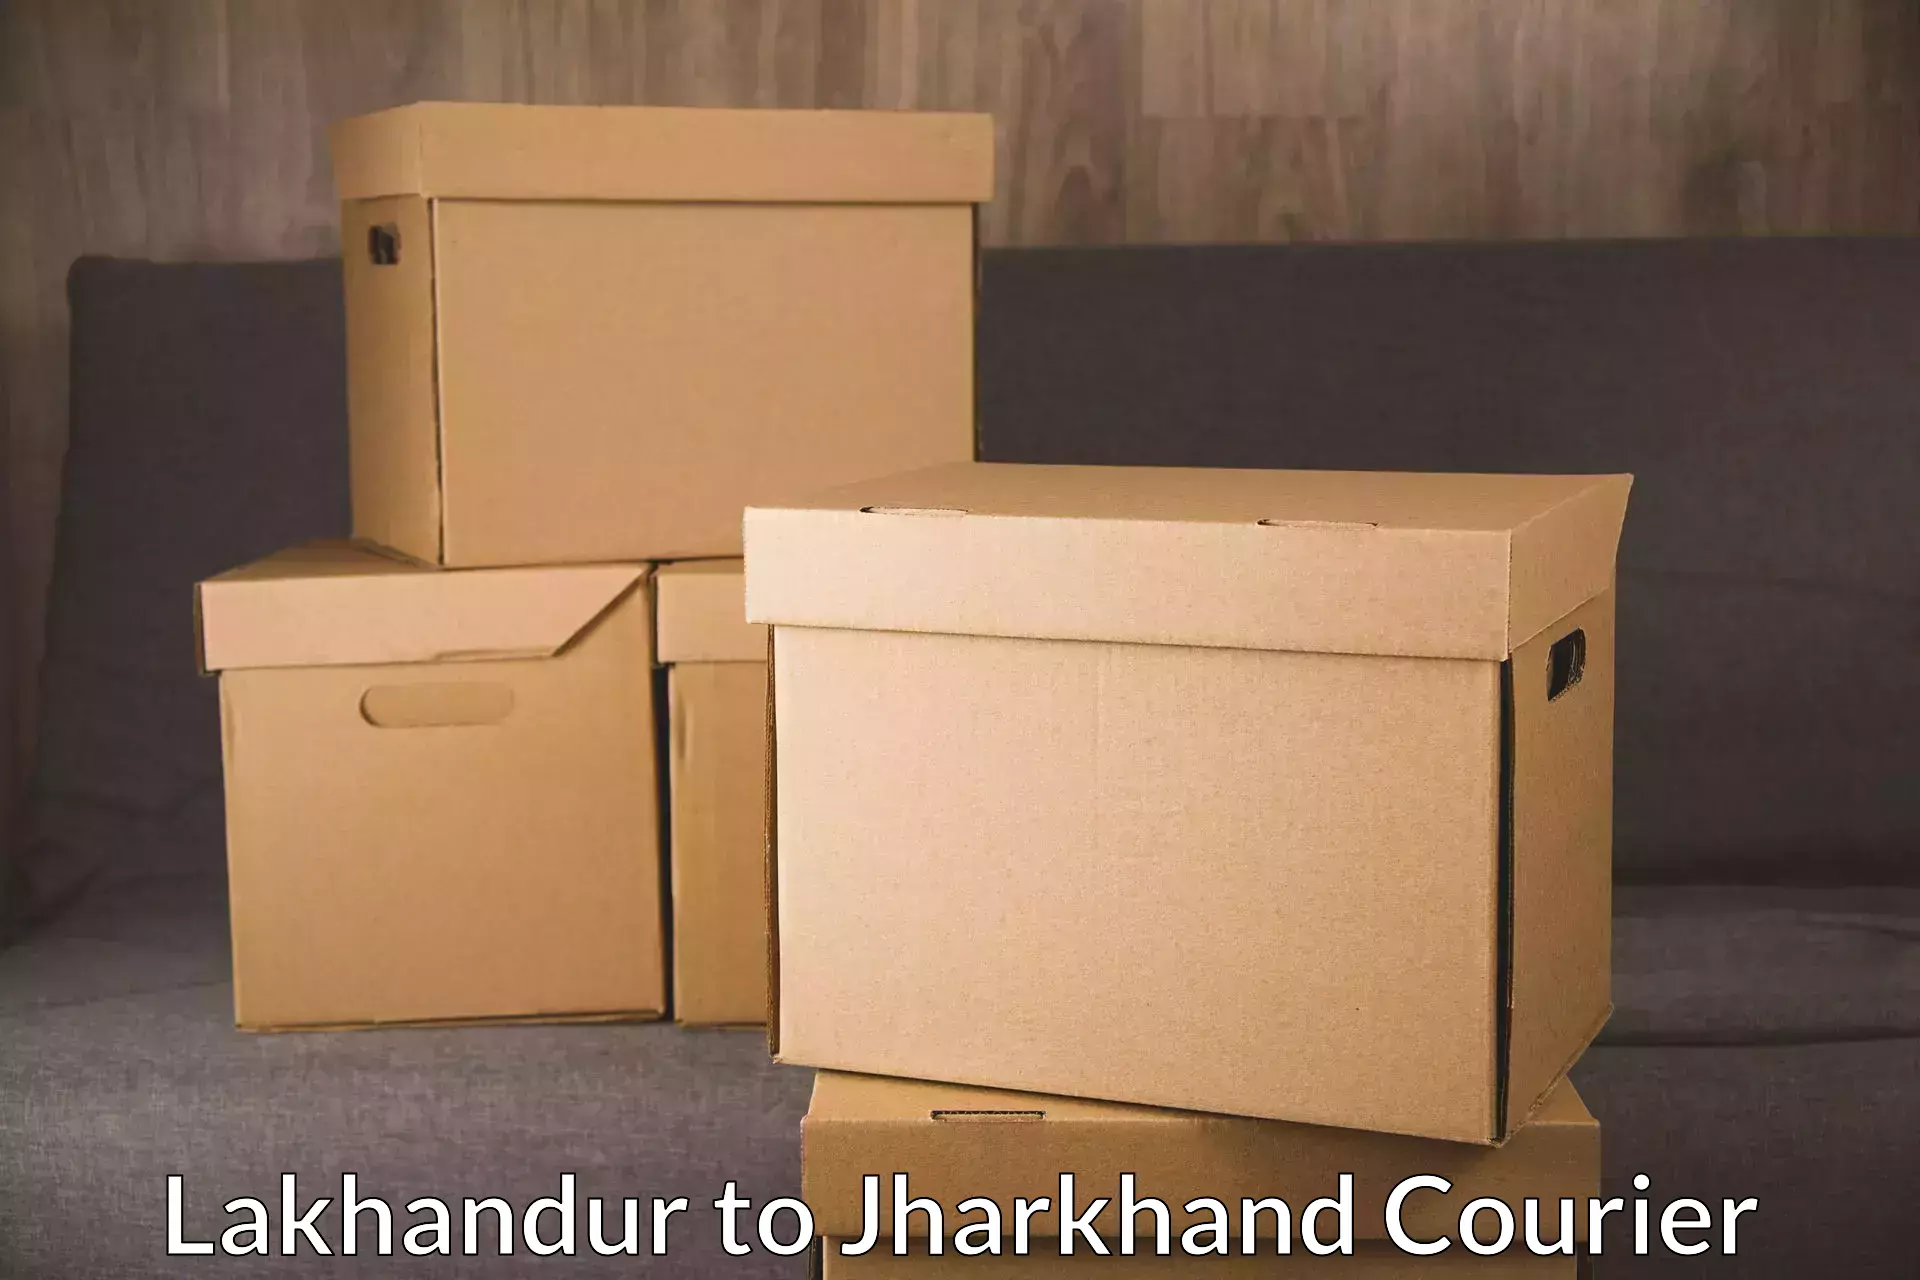 Round-the-clock parcel delivery Lakhandur to Kedla